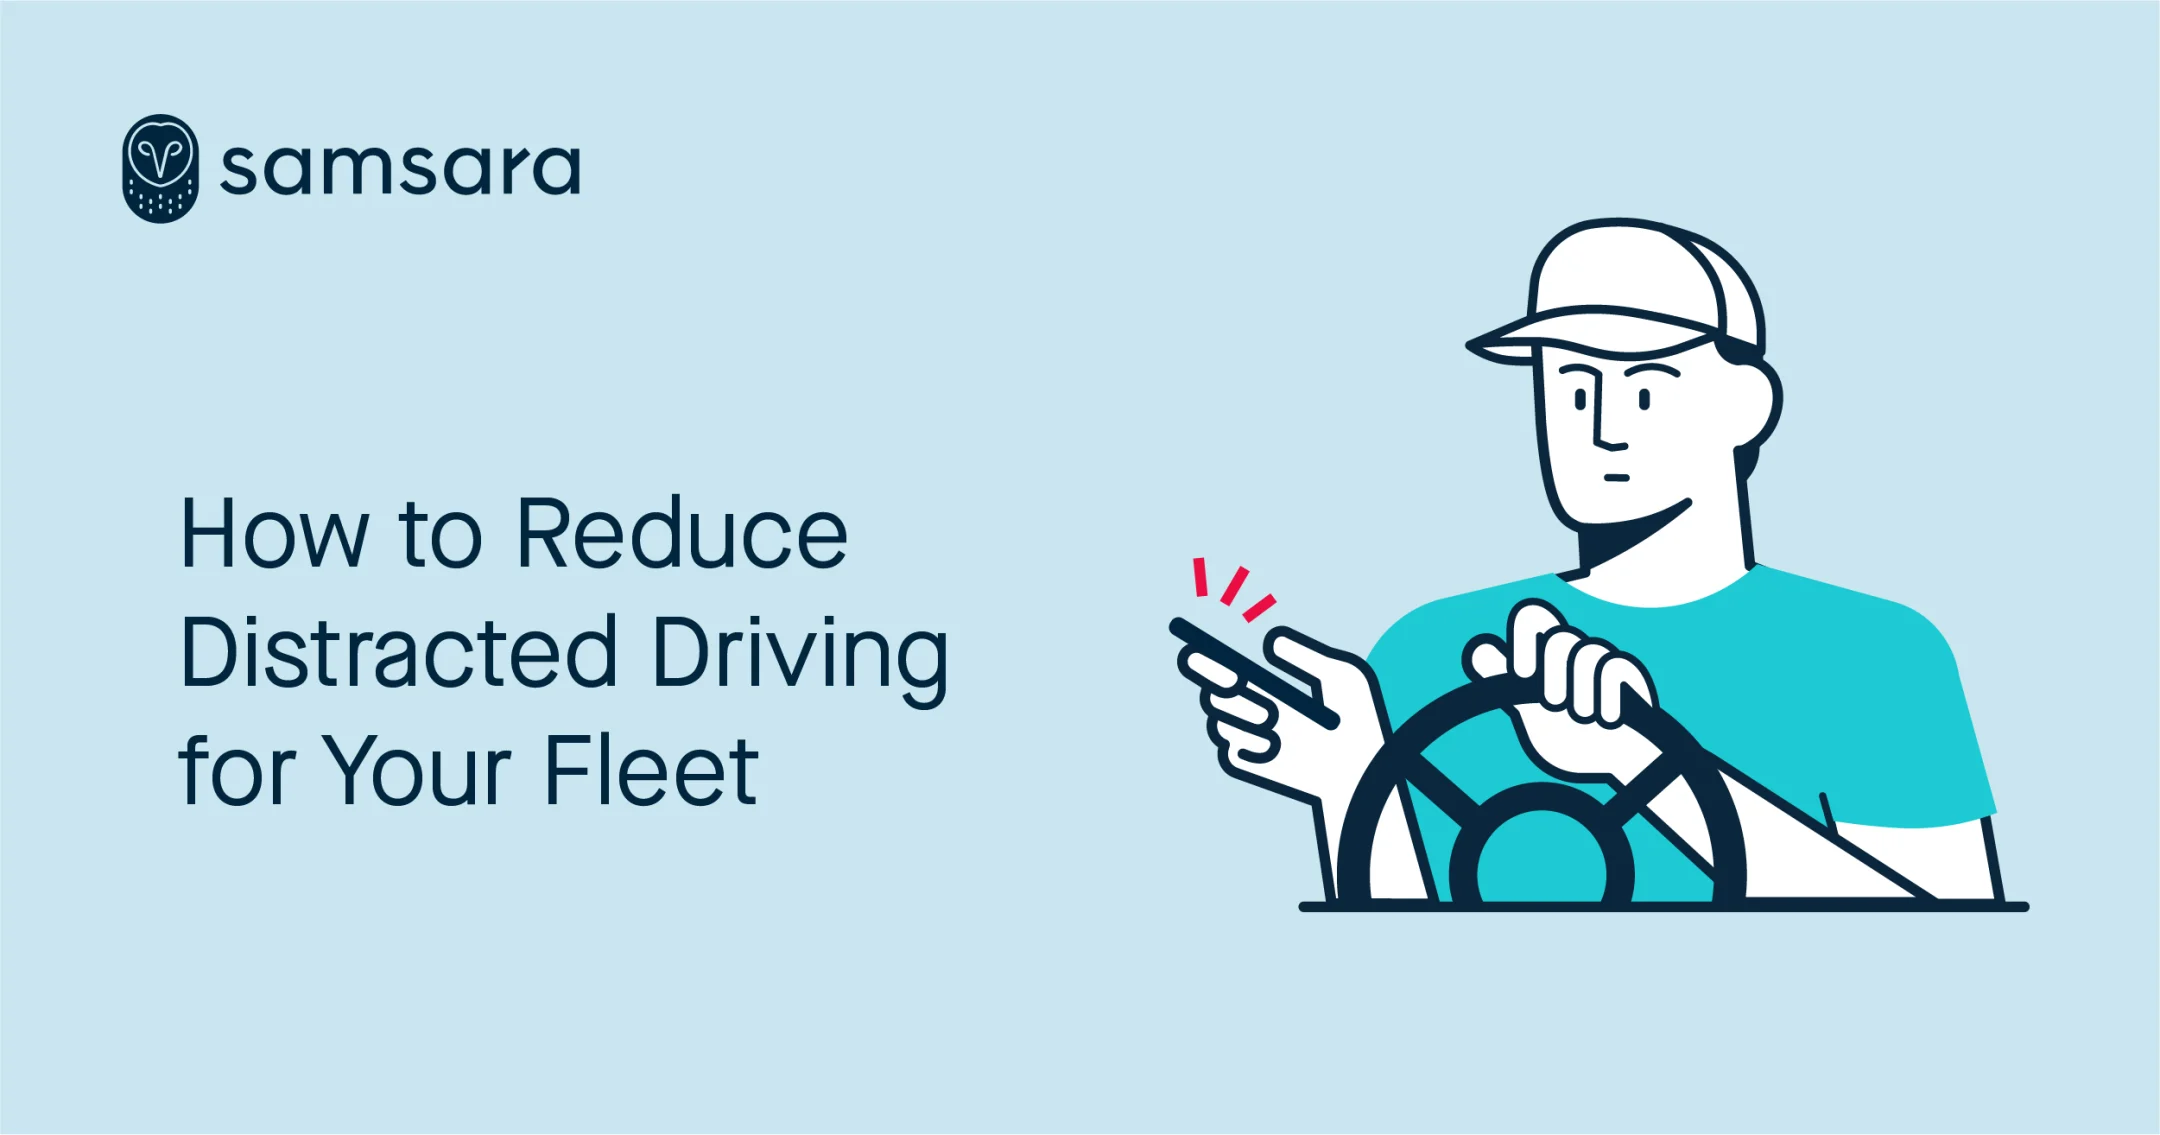 How to Reduce Distracted Driving for Your Fleet